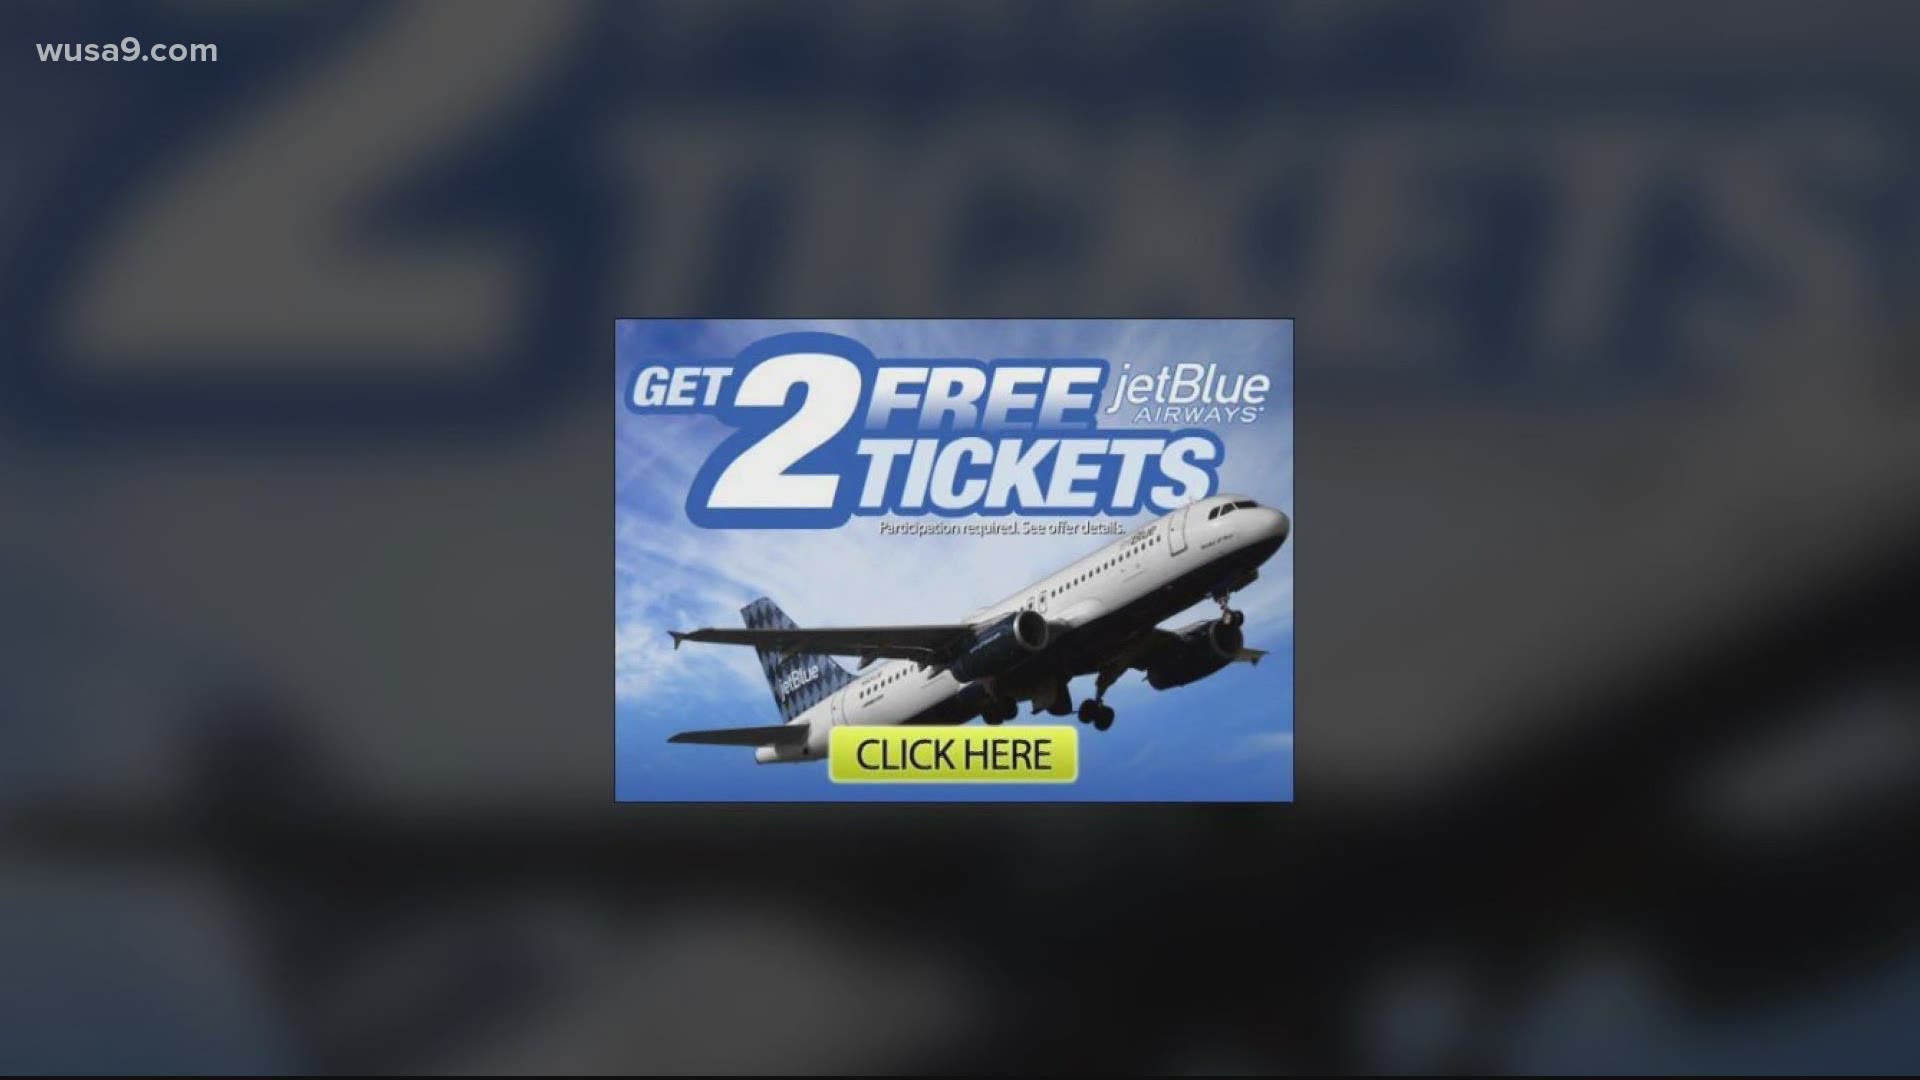 No, JetBlue is not offering free airline tickets